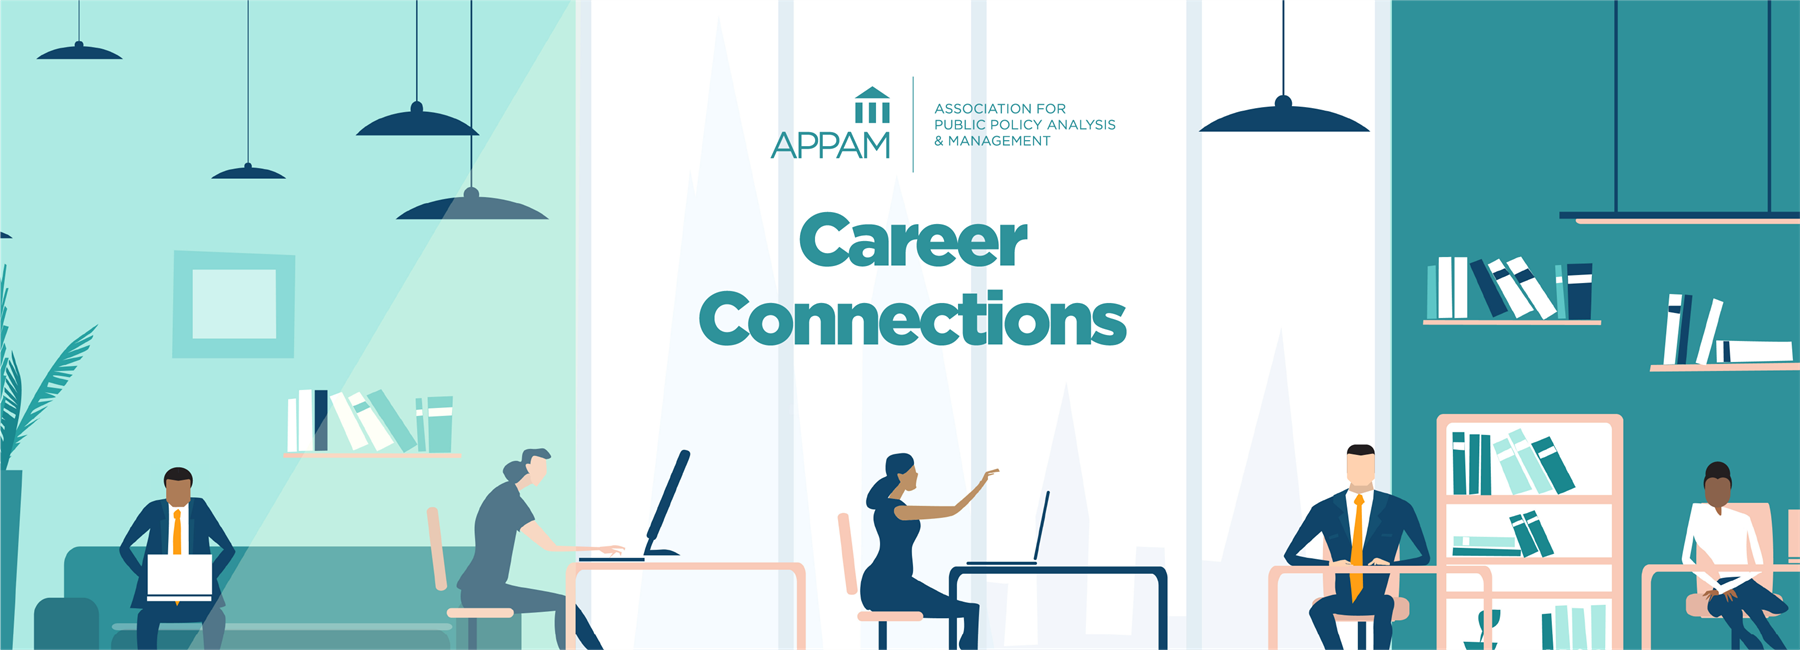 APPAM Career Connections